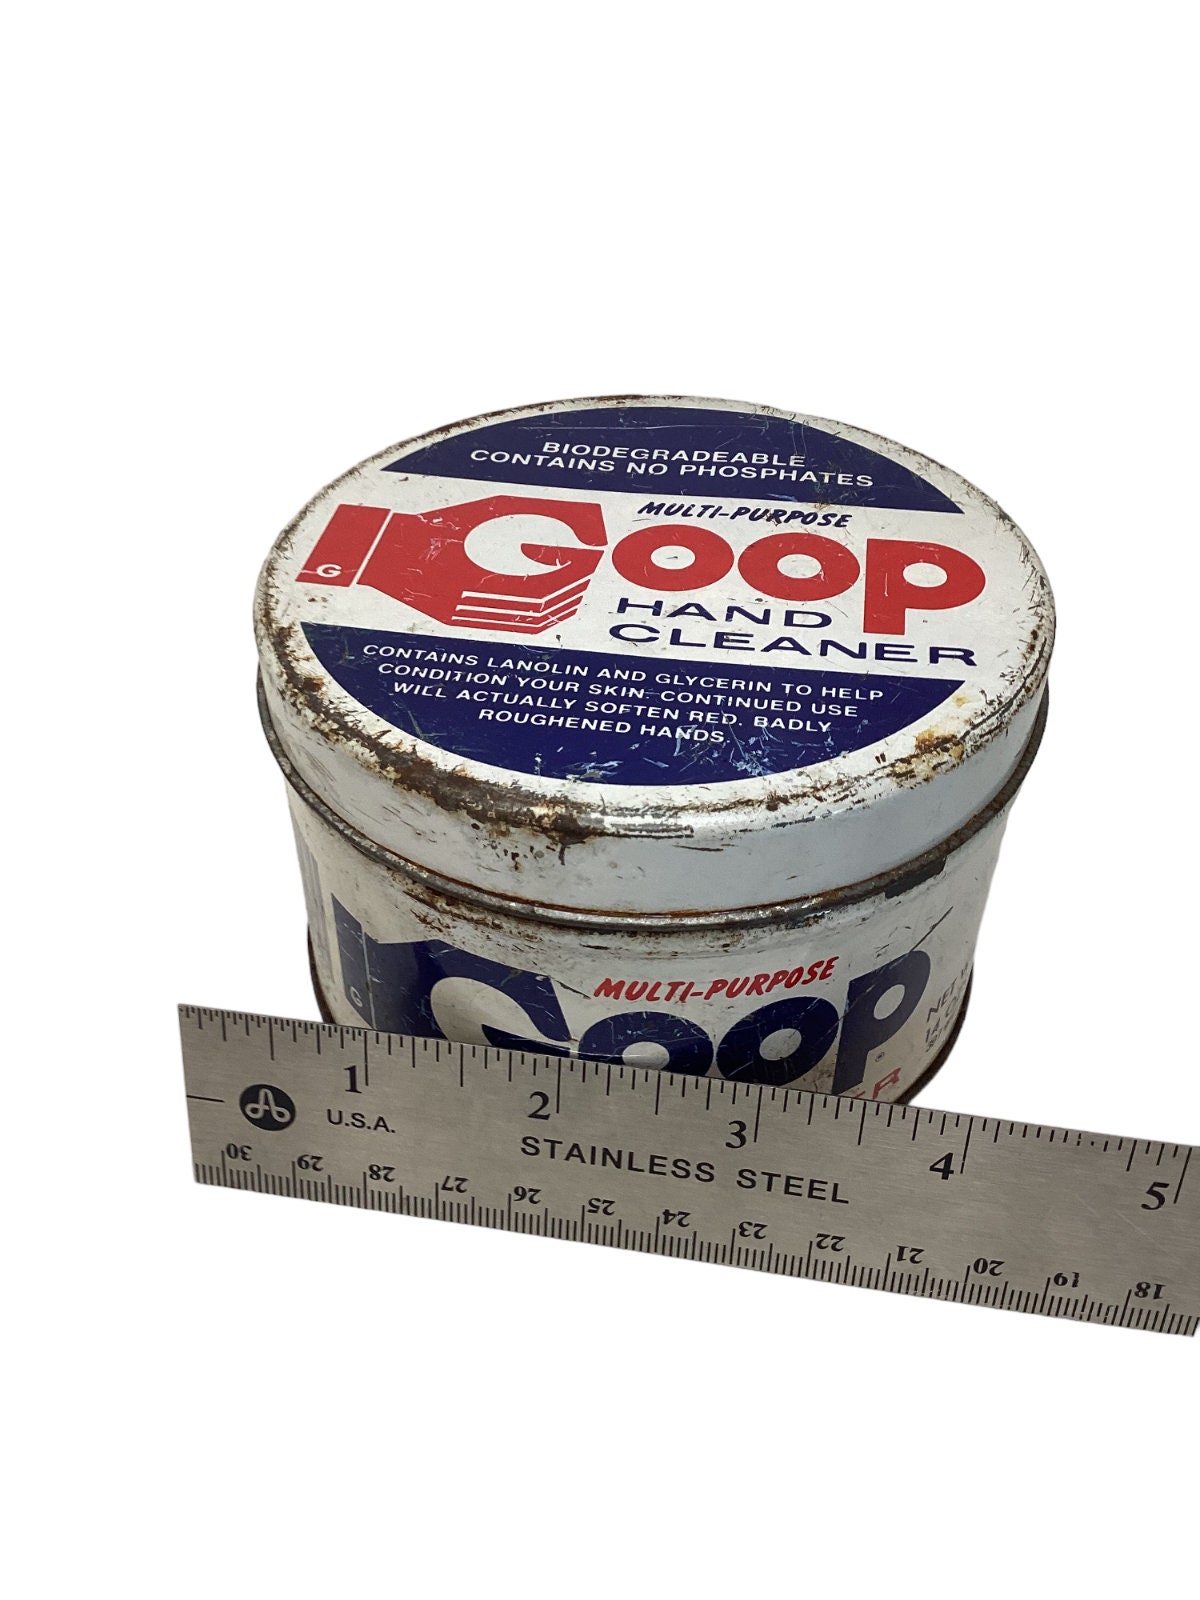 Vintage Goop Hand Cleaner Soap Can Empty 14 Ounce Tin Advertising Garage  Vintage -  Hong Kong